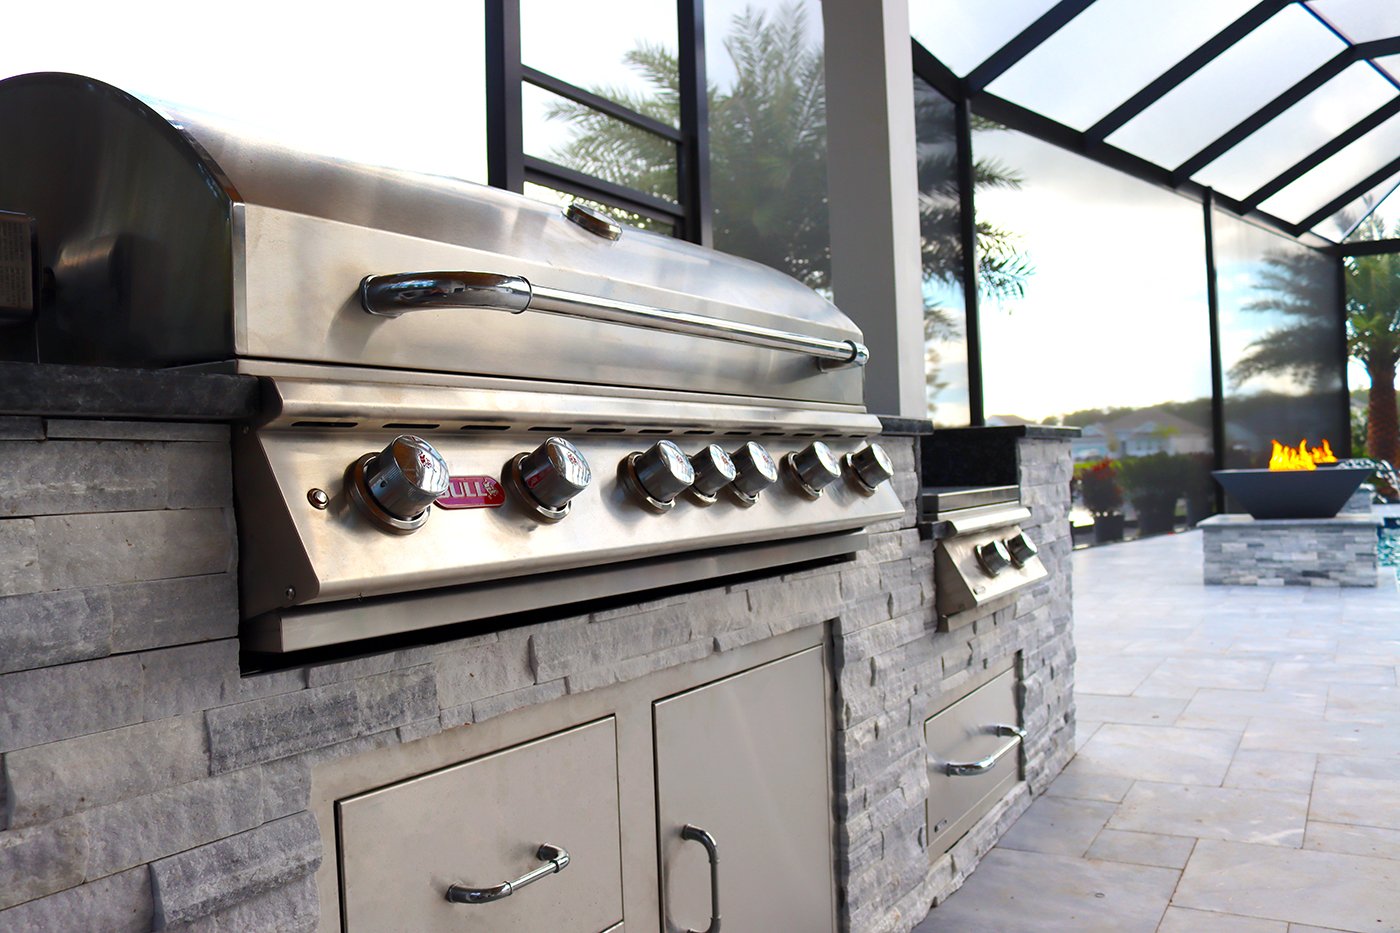 What Are Outdoor Kitchens Usually Made Of?